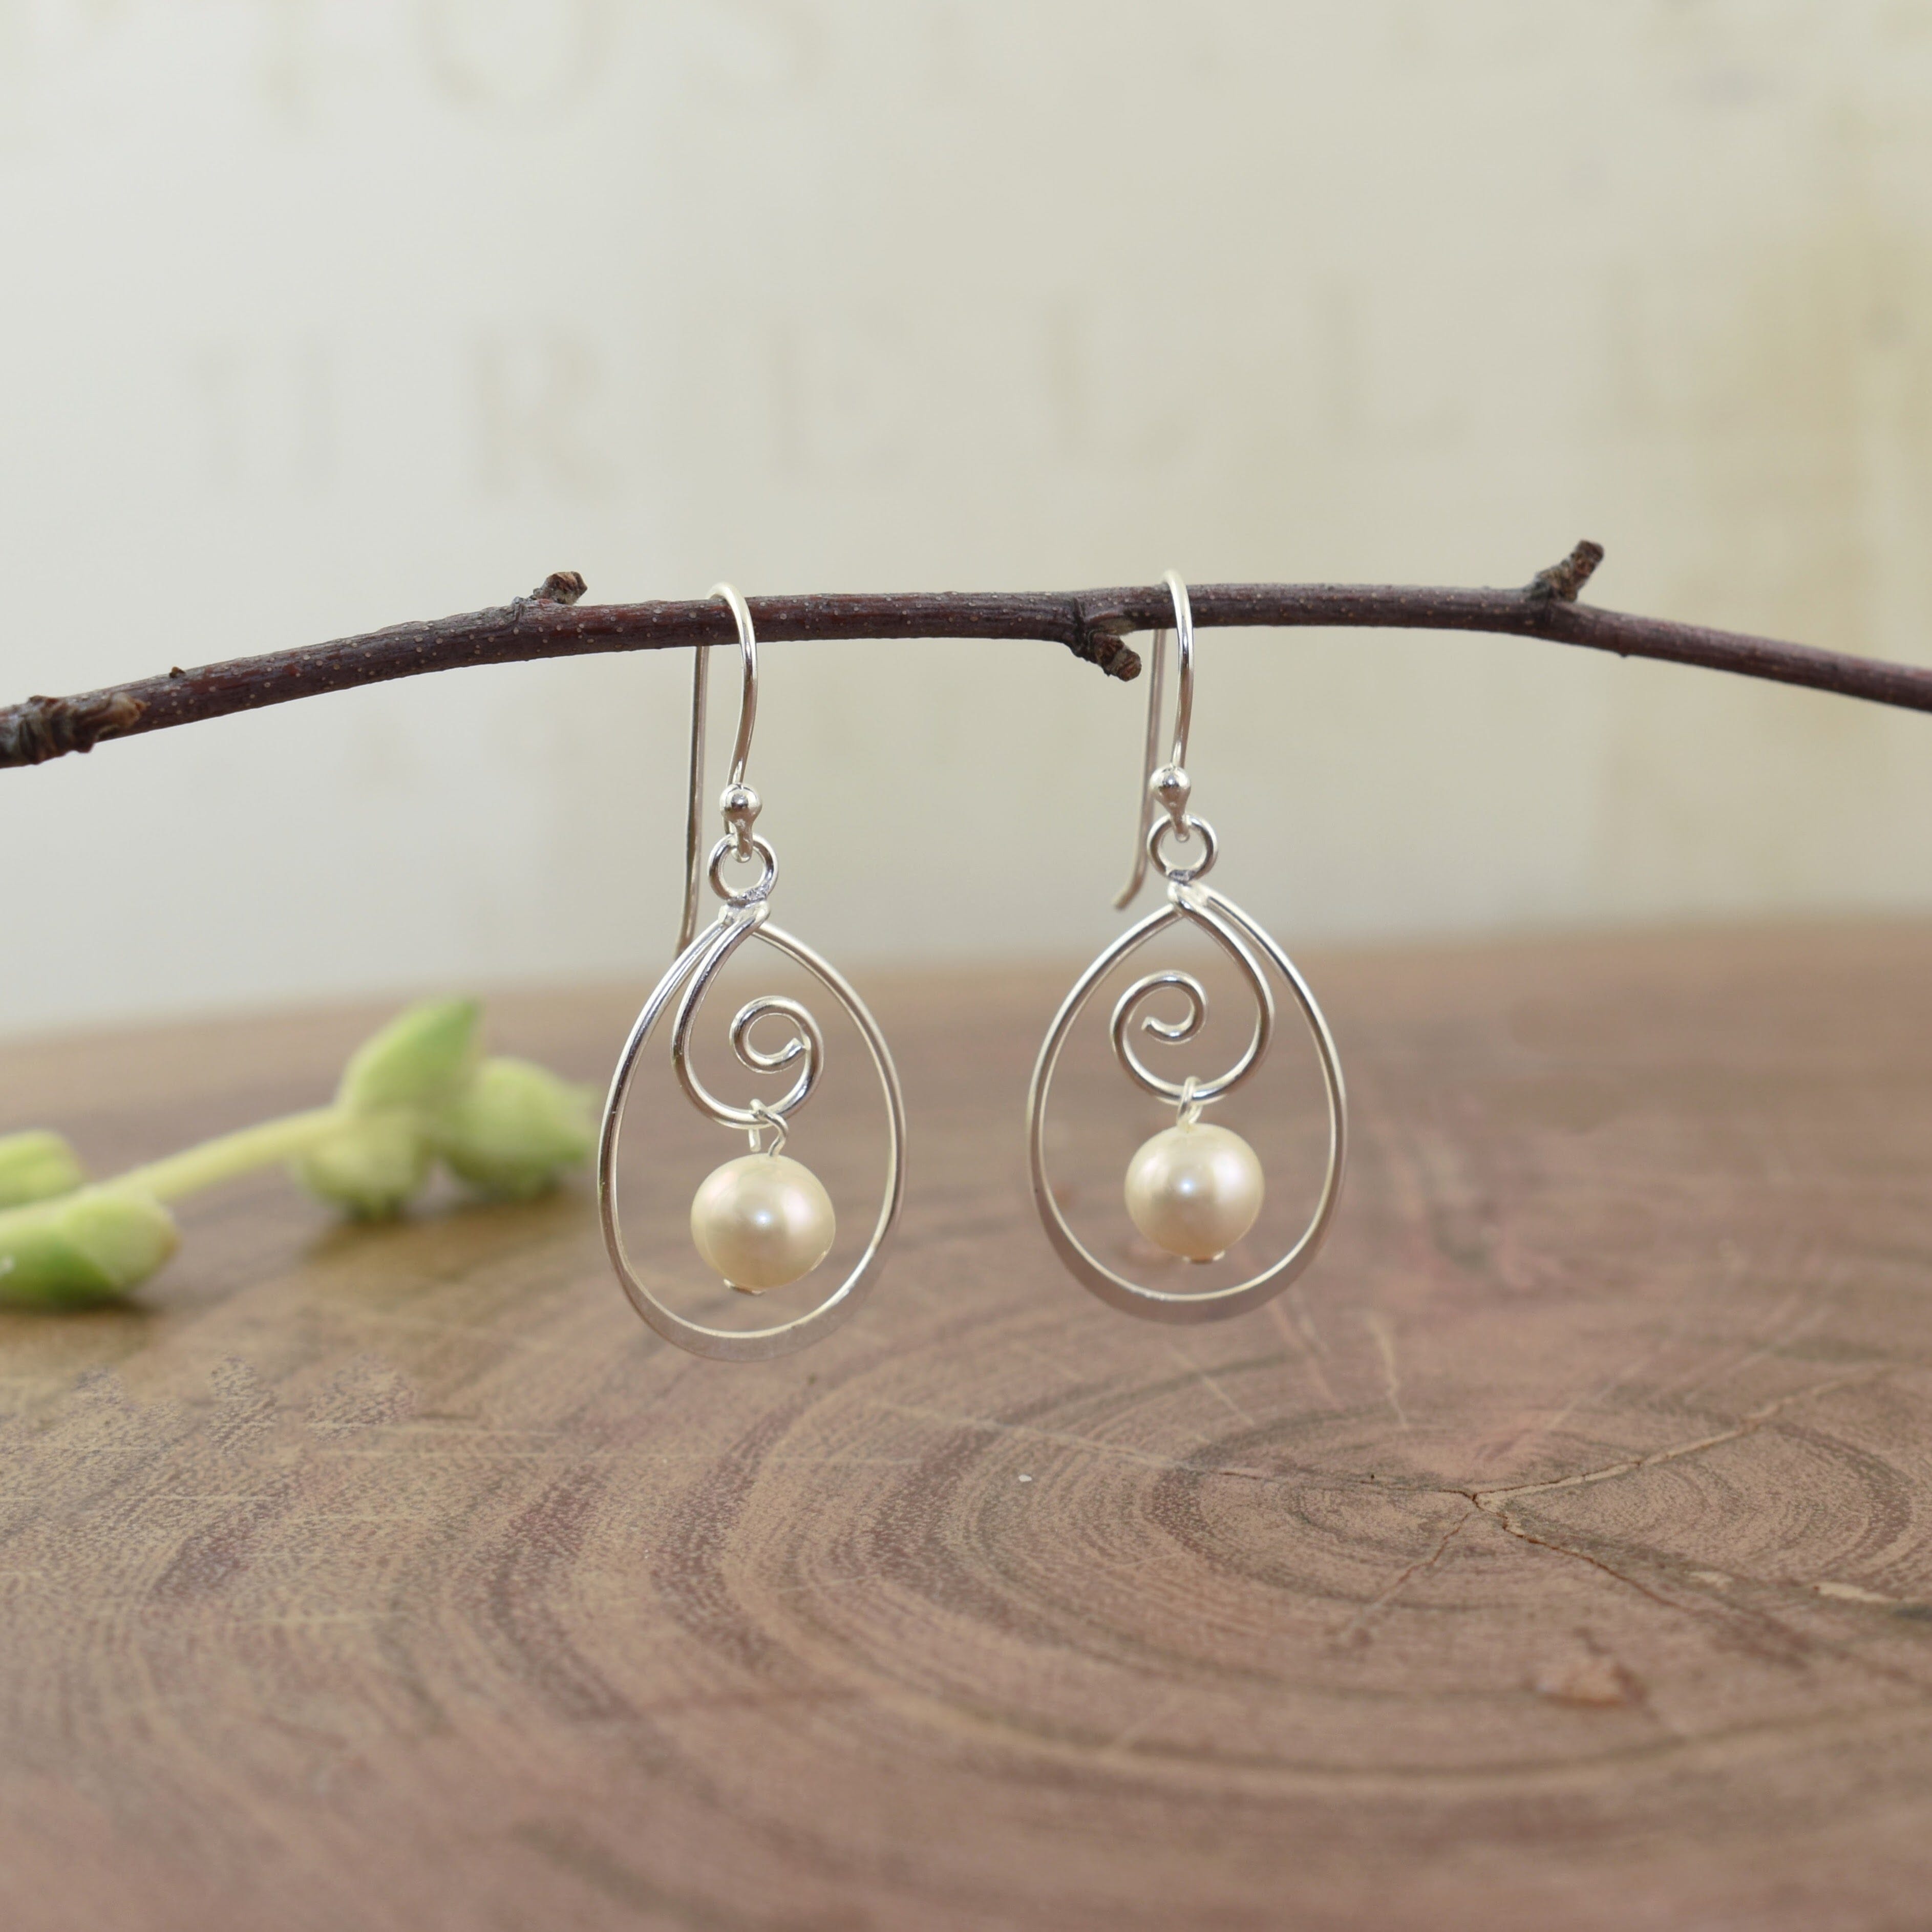 .925 sterling silver earrings with freshwater pearl dangles